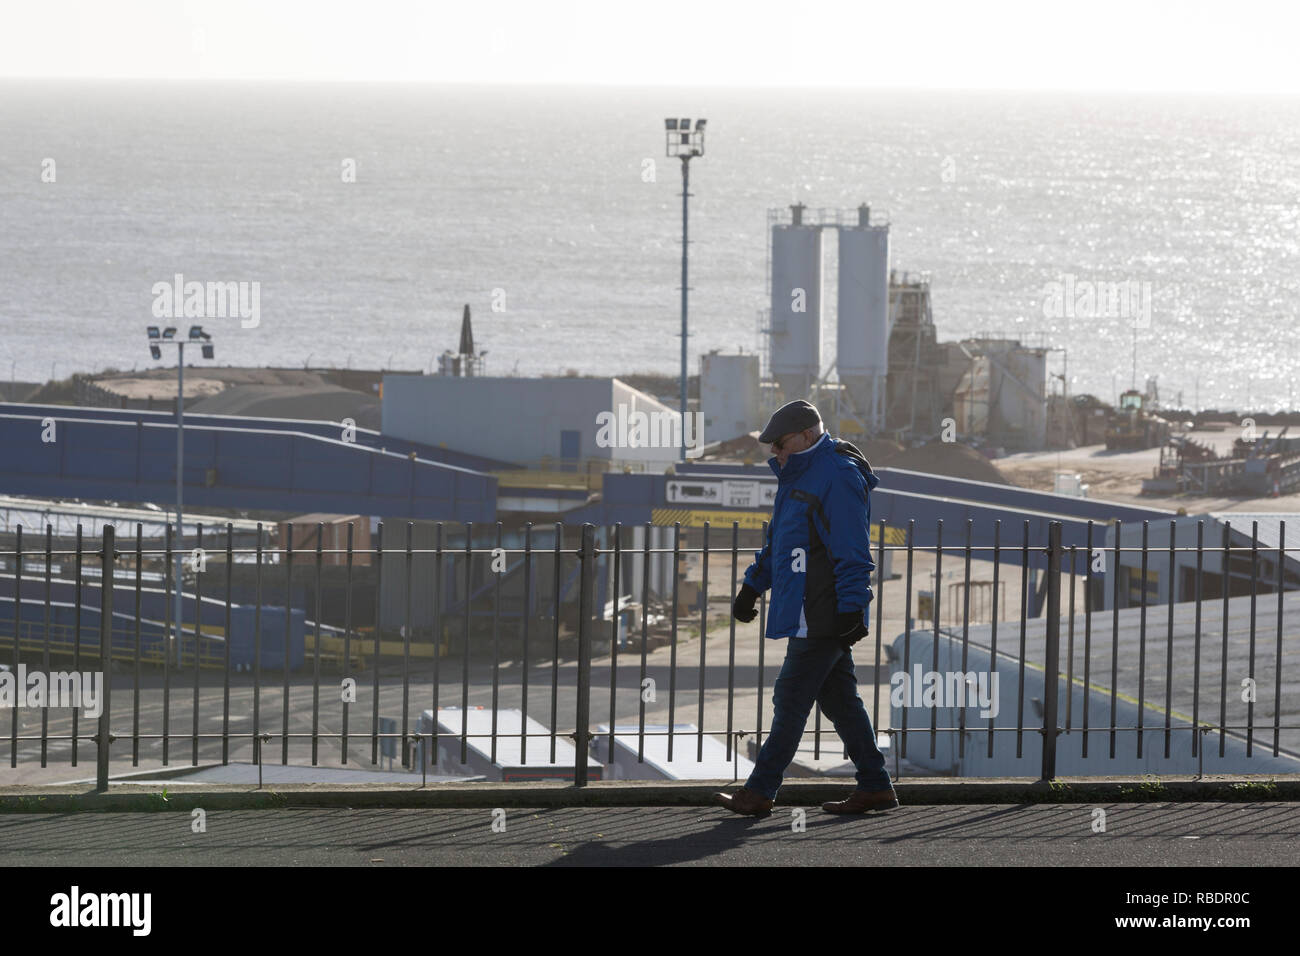 A Kent man walks along West Cliff Promenade that overlooks the Port of Ramsgate, a closed but once busy ferry terminal, on 8th January 2019, in Ramsgate, Kent, England. The Port of Ramsgate has been identified as a 'Brexit Port' by the government of Prime Minister Theresa May, currently negotiating the UK's exit from the EU. Britain's Department of Transport has awarded to an unproven shipping company, Seaborne Freight, to provide run roll-on roll-off ferry services to the road haulage industry between Ostend and the Kent port - in the event of more likely No Deal Brexit. In the EU referendum  Stock Photo